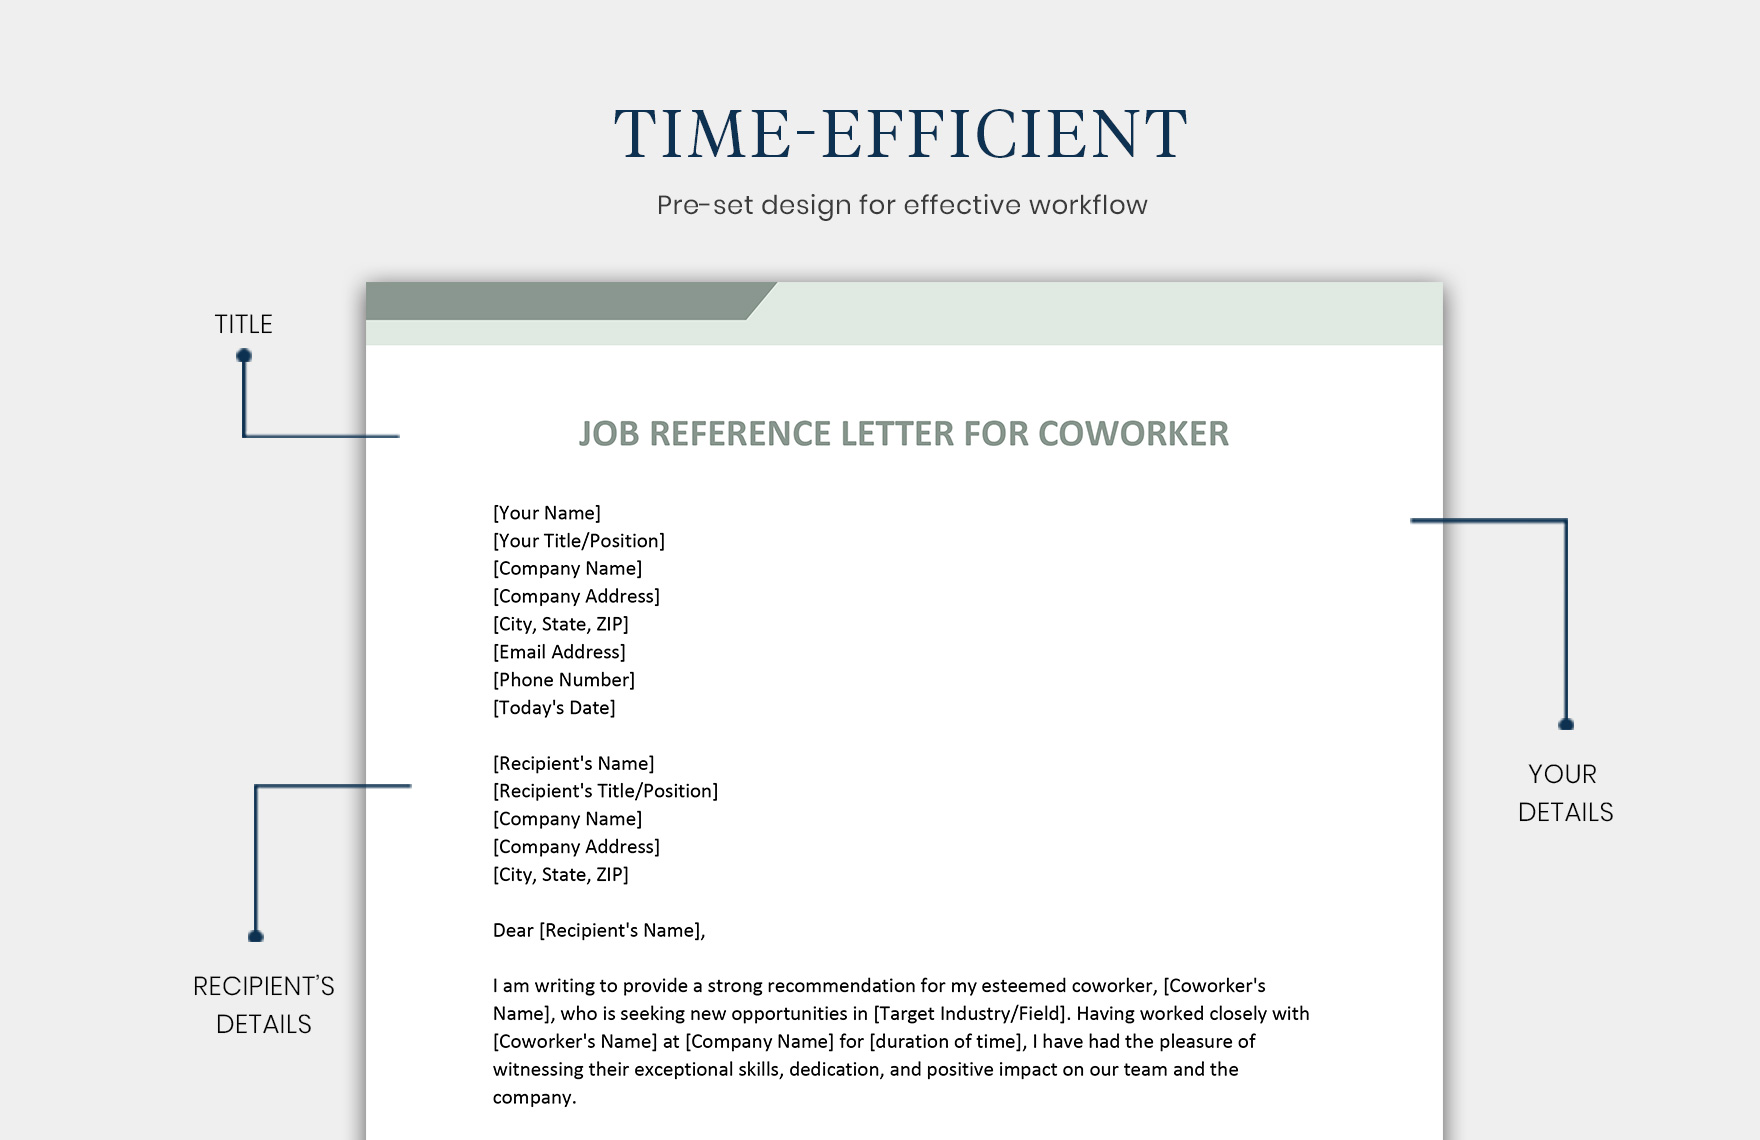 Job Reference Letter for Coworker